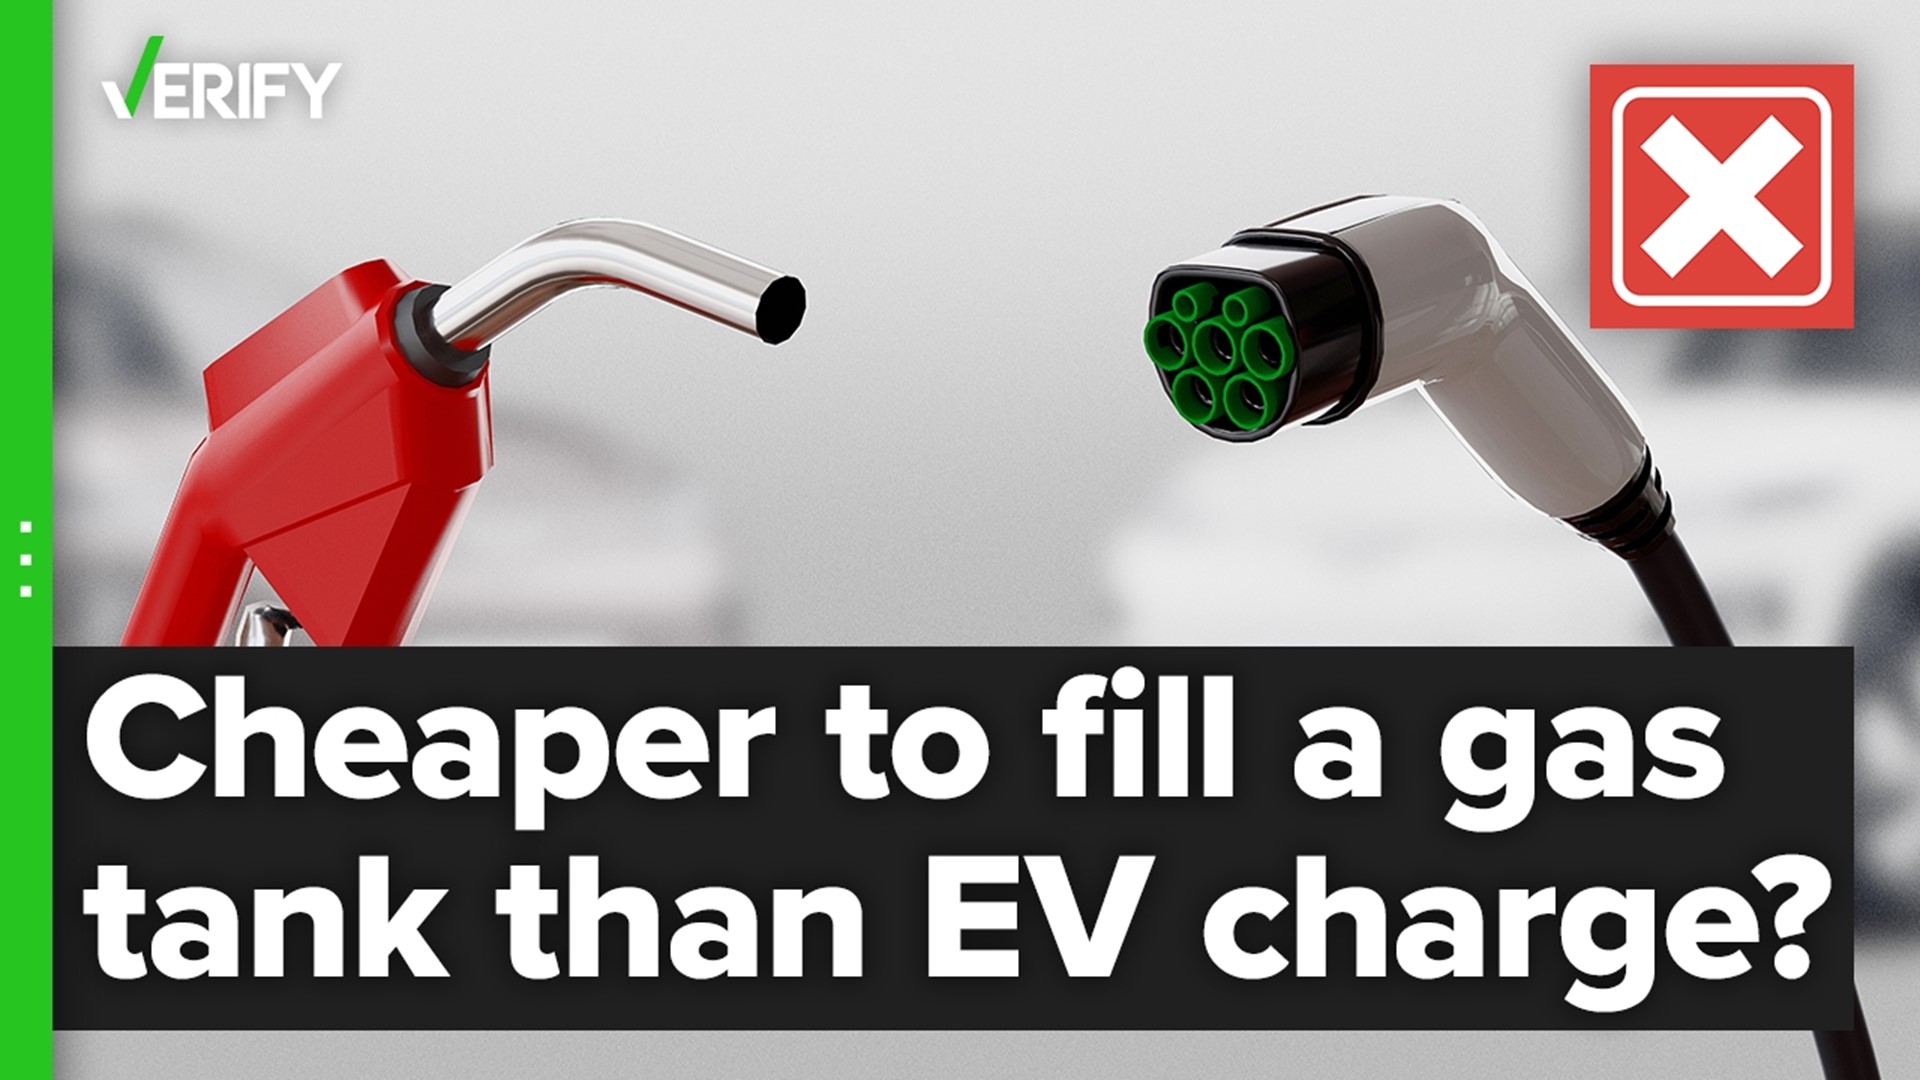 Is it cheaper to go one mile in a gas-powered car than an electric car? The VERIFY team confirms this is false.